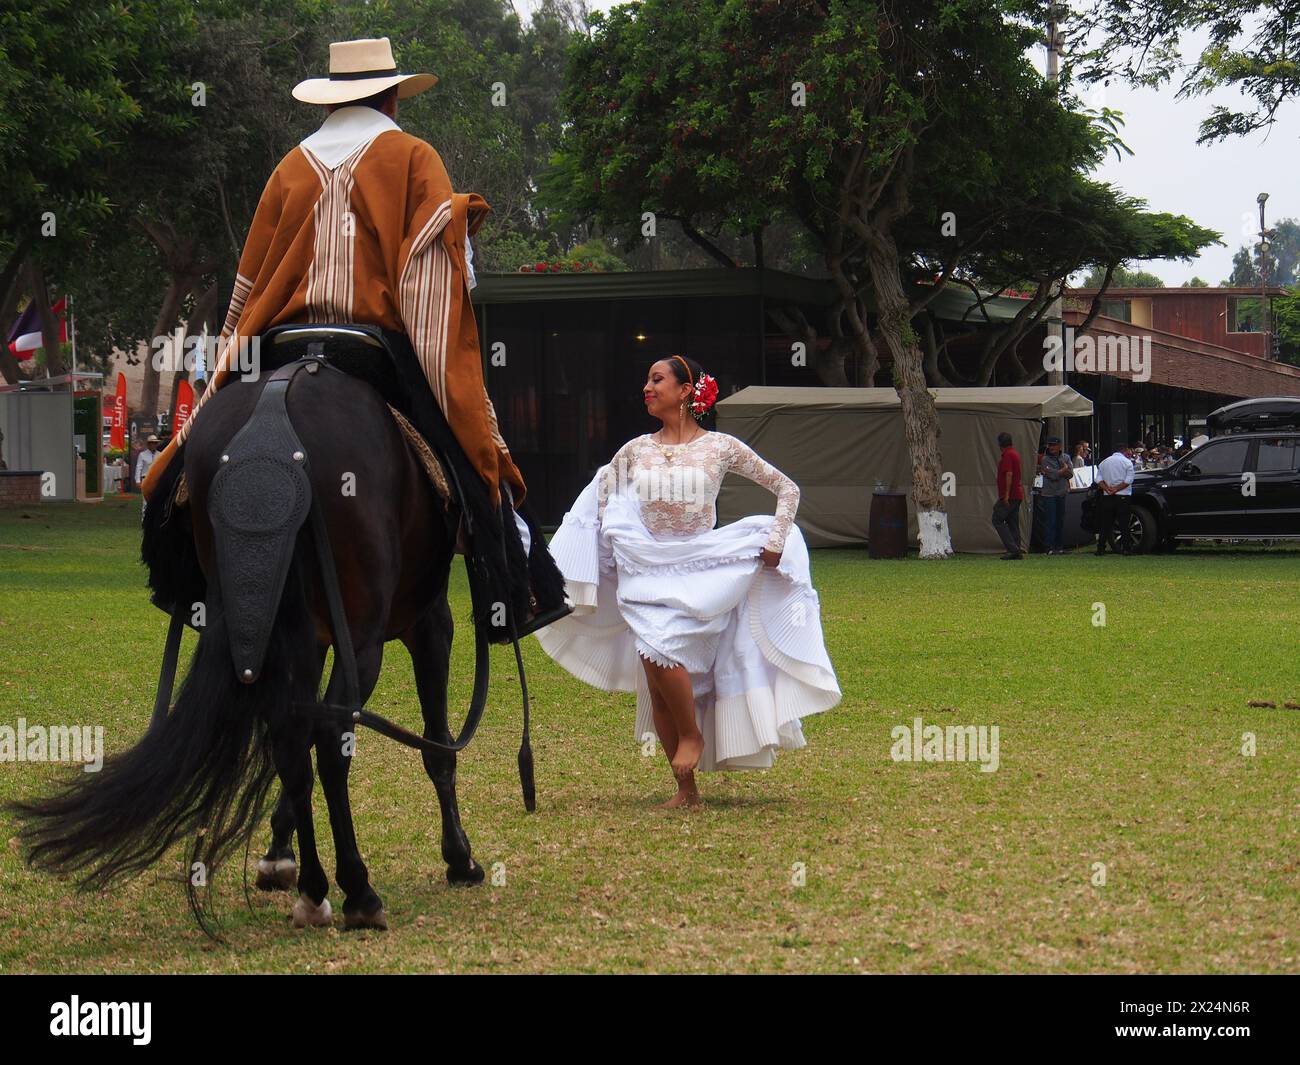 Creole woman in typical costume dancing “Marinera”, a traditional dance, with a Chalan riding a Peruvian Paso horse at the 2024 Peruvian Paso Horse National Championship at Mamacona farm. The Peruvian Paso Horse is a breed of light saddle horse known for its smooth ride distinguished by a natural, four-beat, lateral gait and was declared a Cultural Heritage of the Nation. Stock Photo